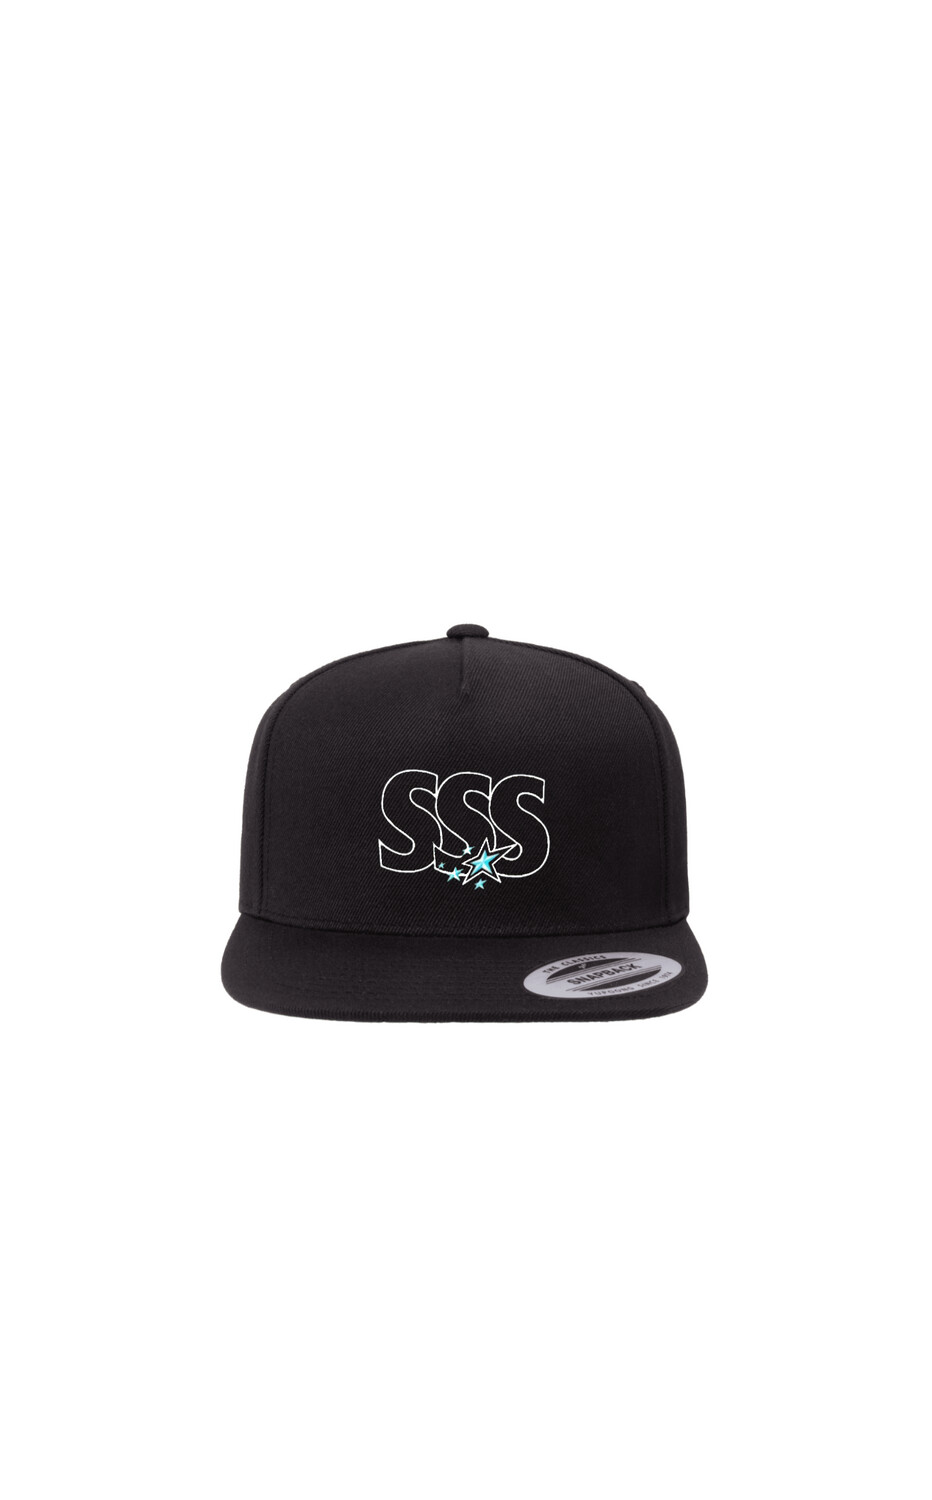 SSS "Playoff' 9Fifty Snapback